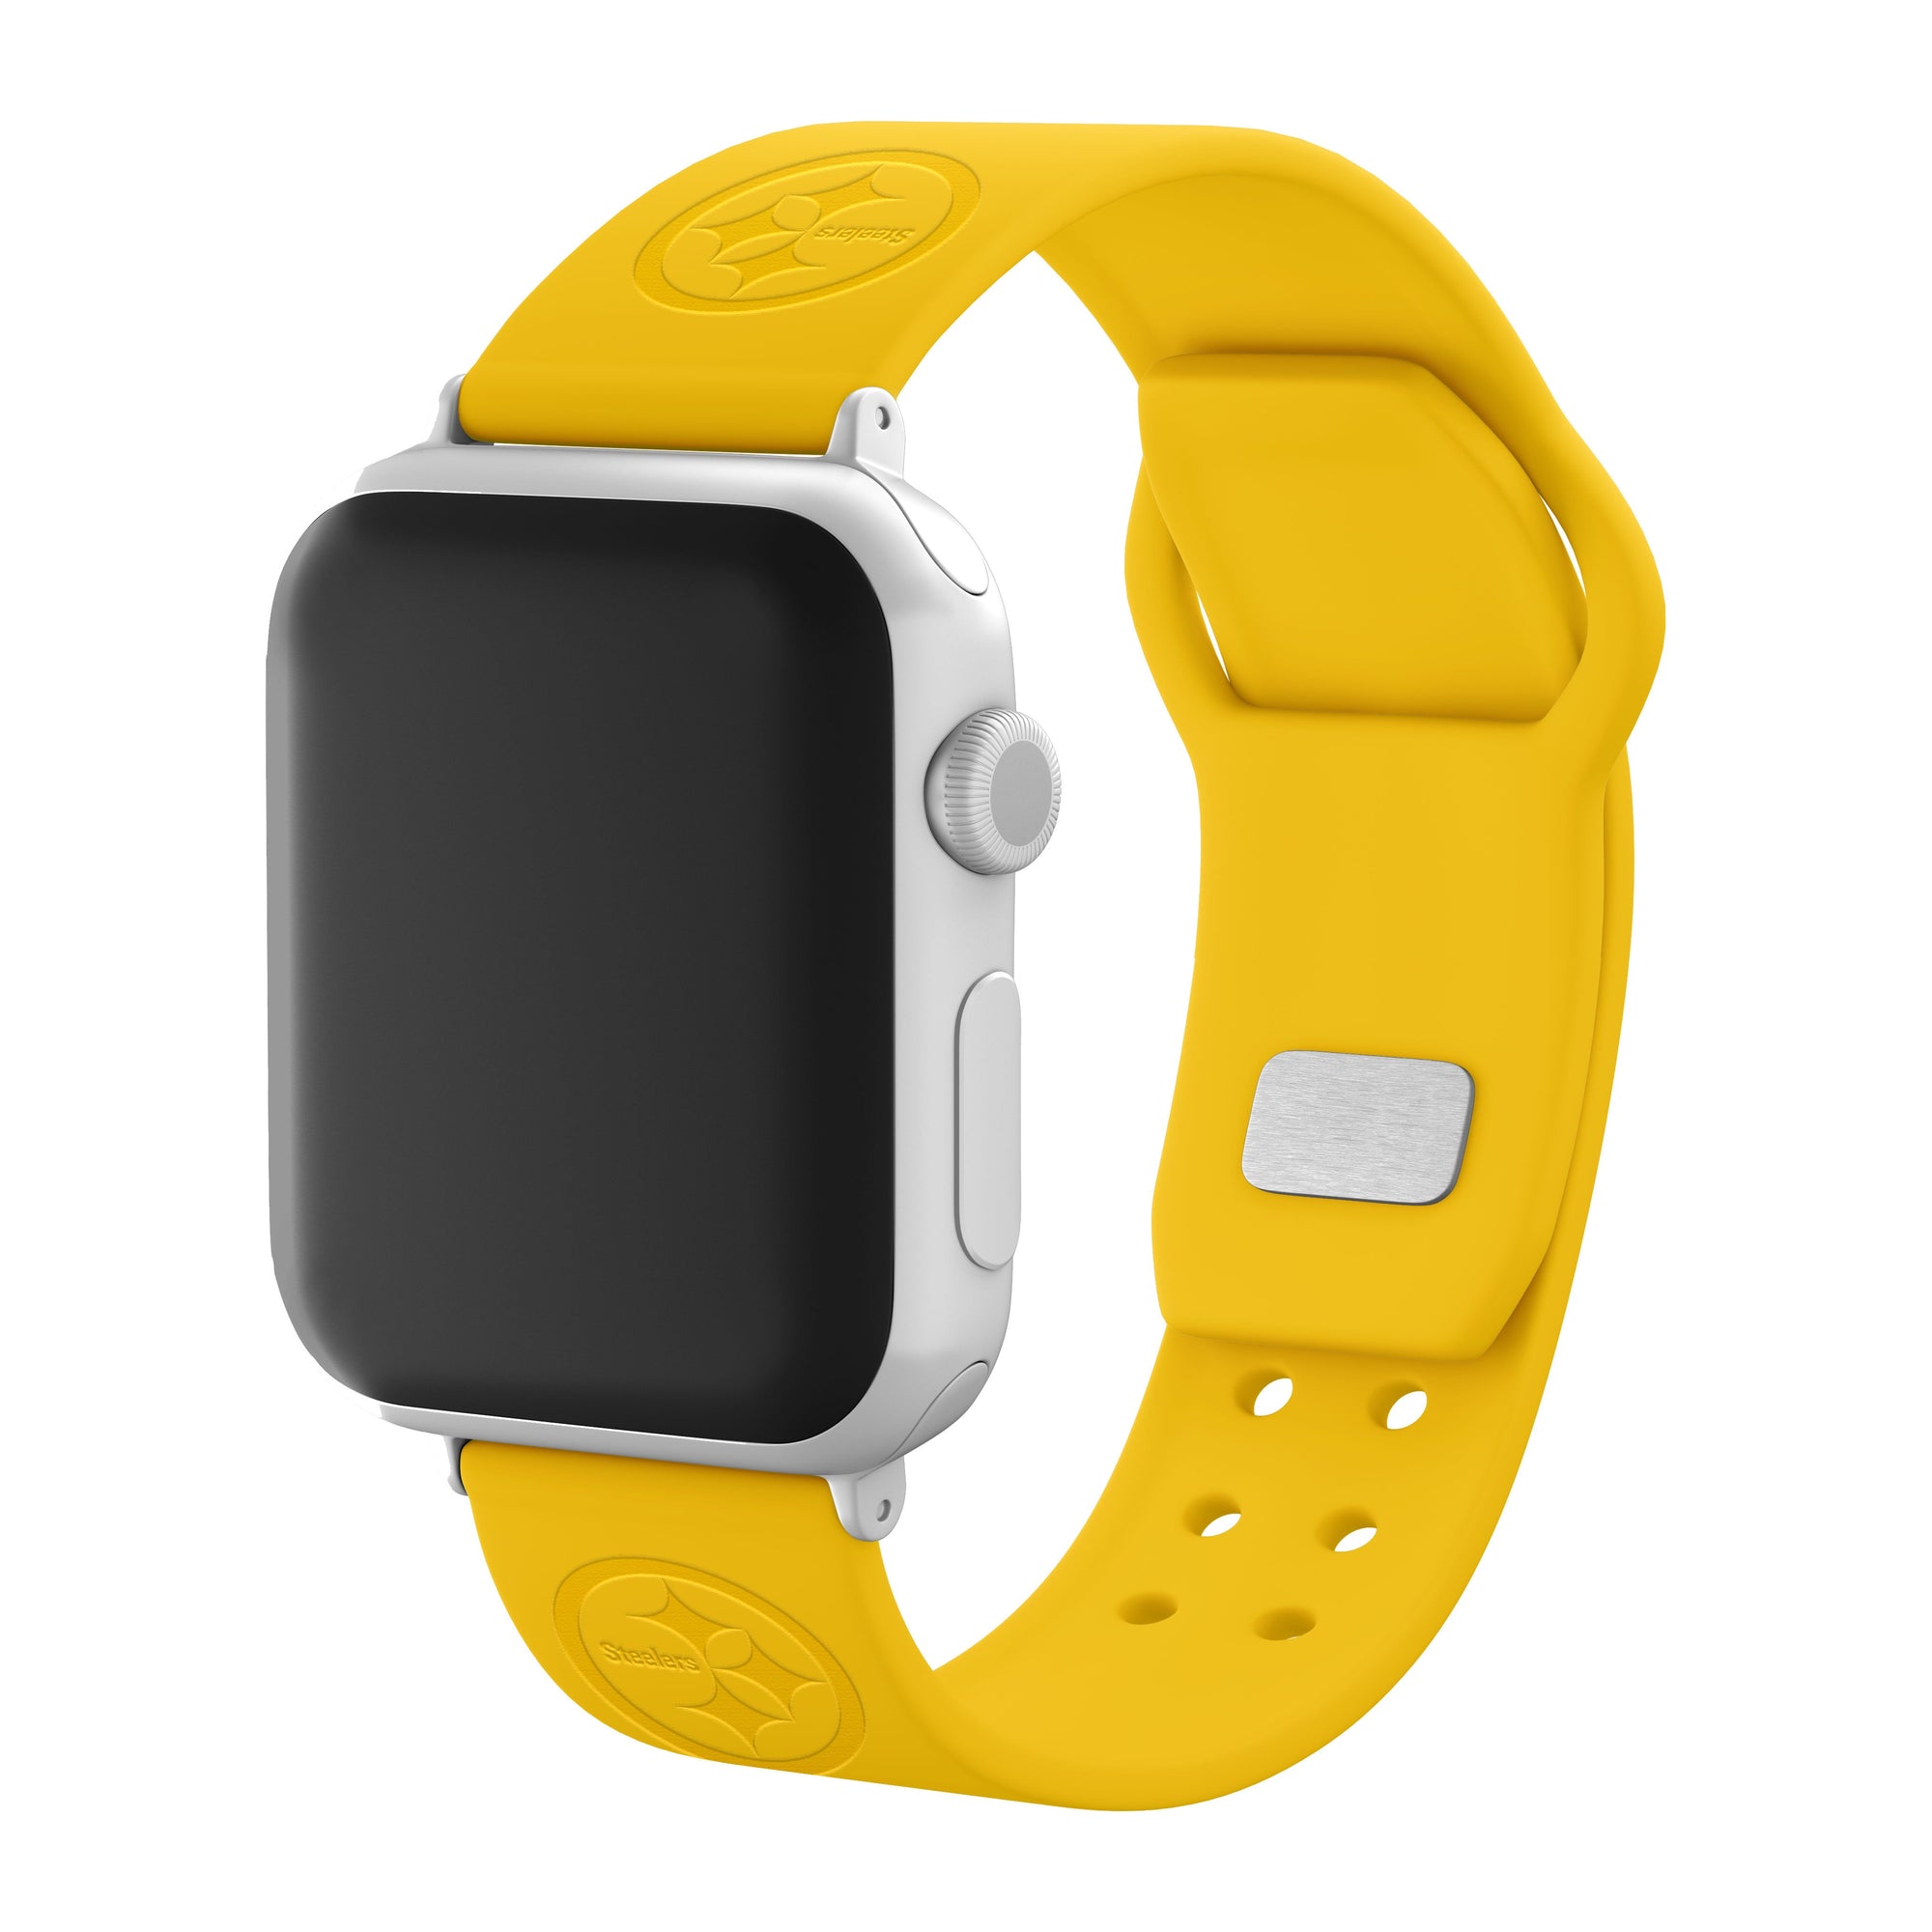 Pittsburgh Steelers Engraved Silicone 'Slim' Apple Watch Band